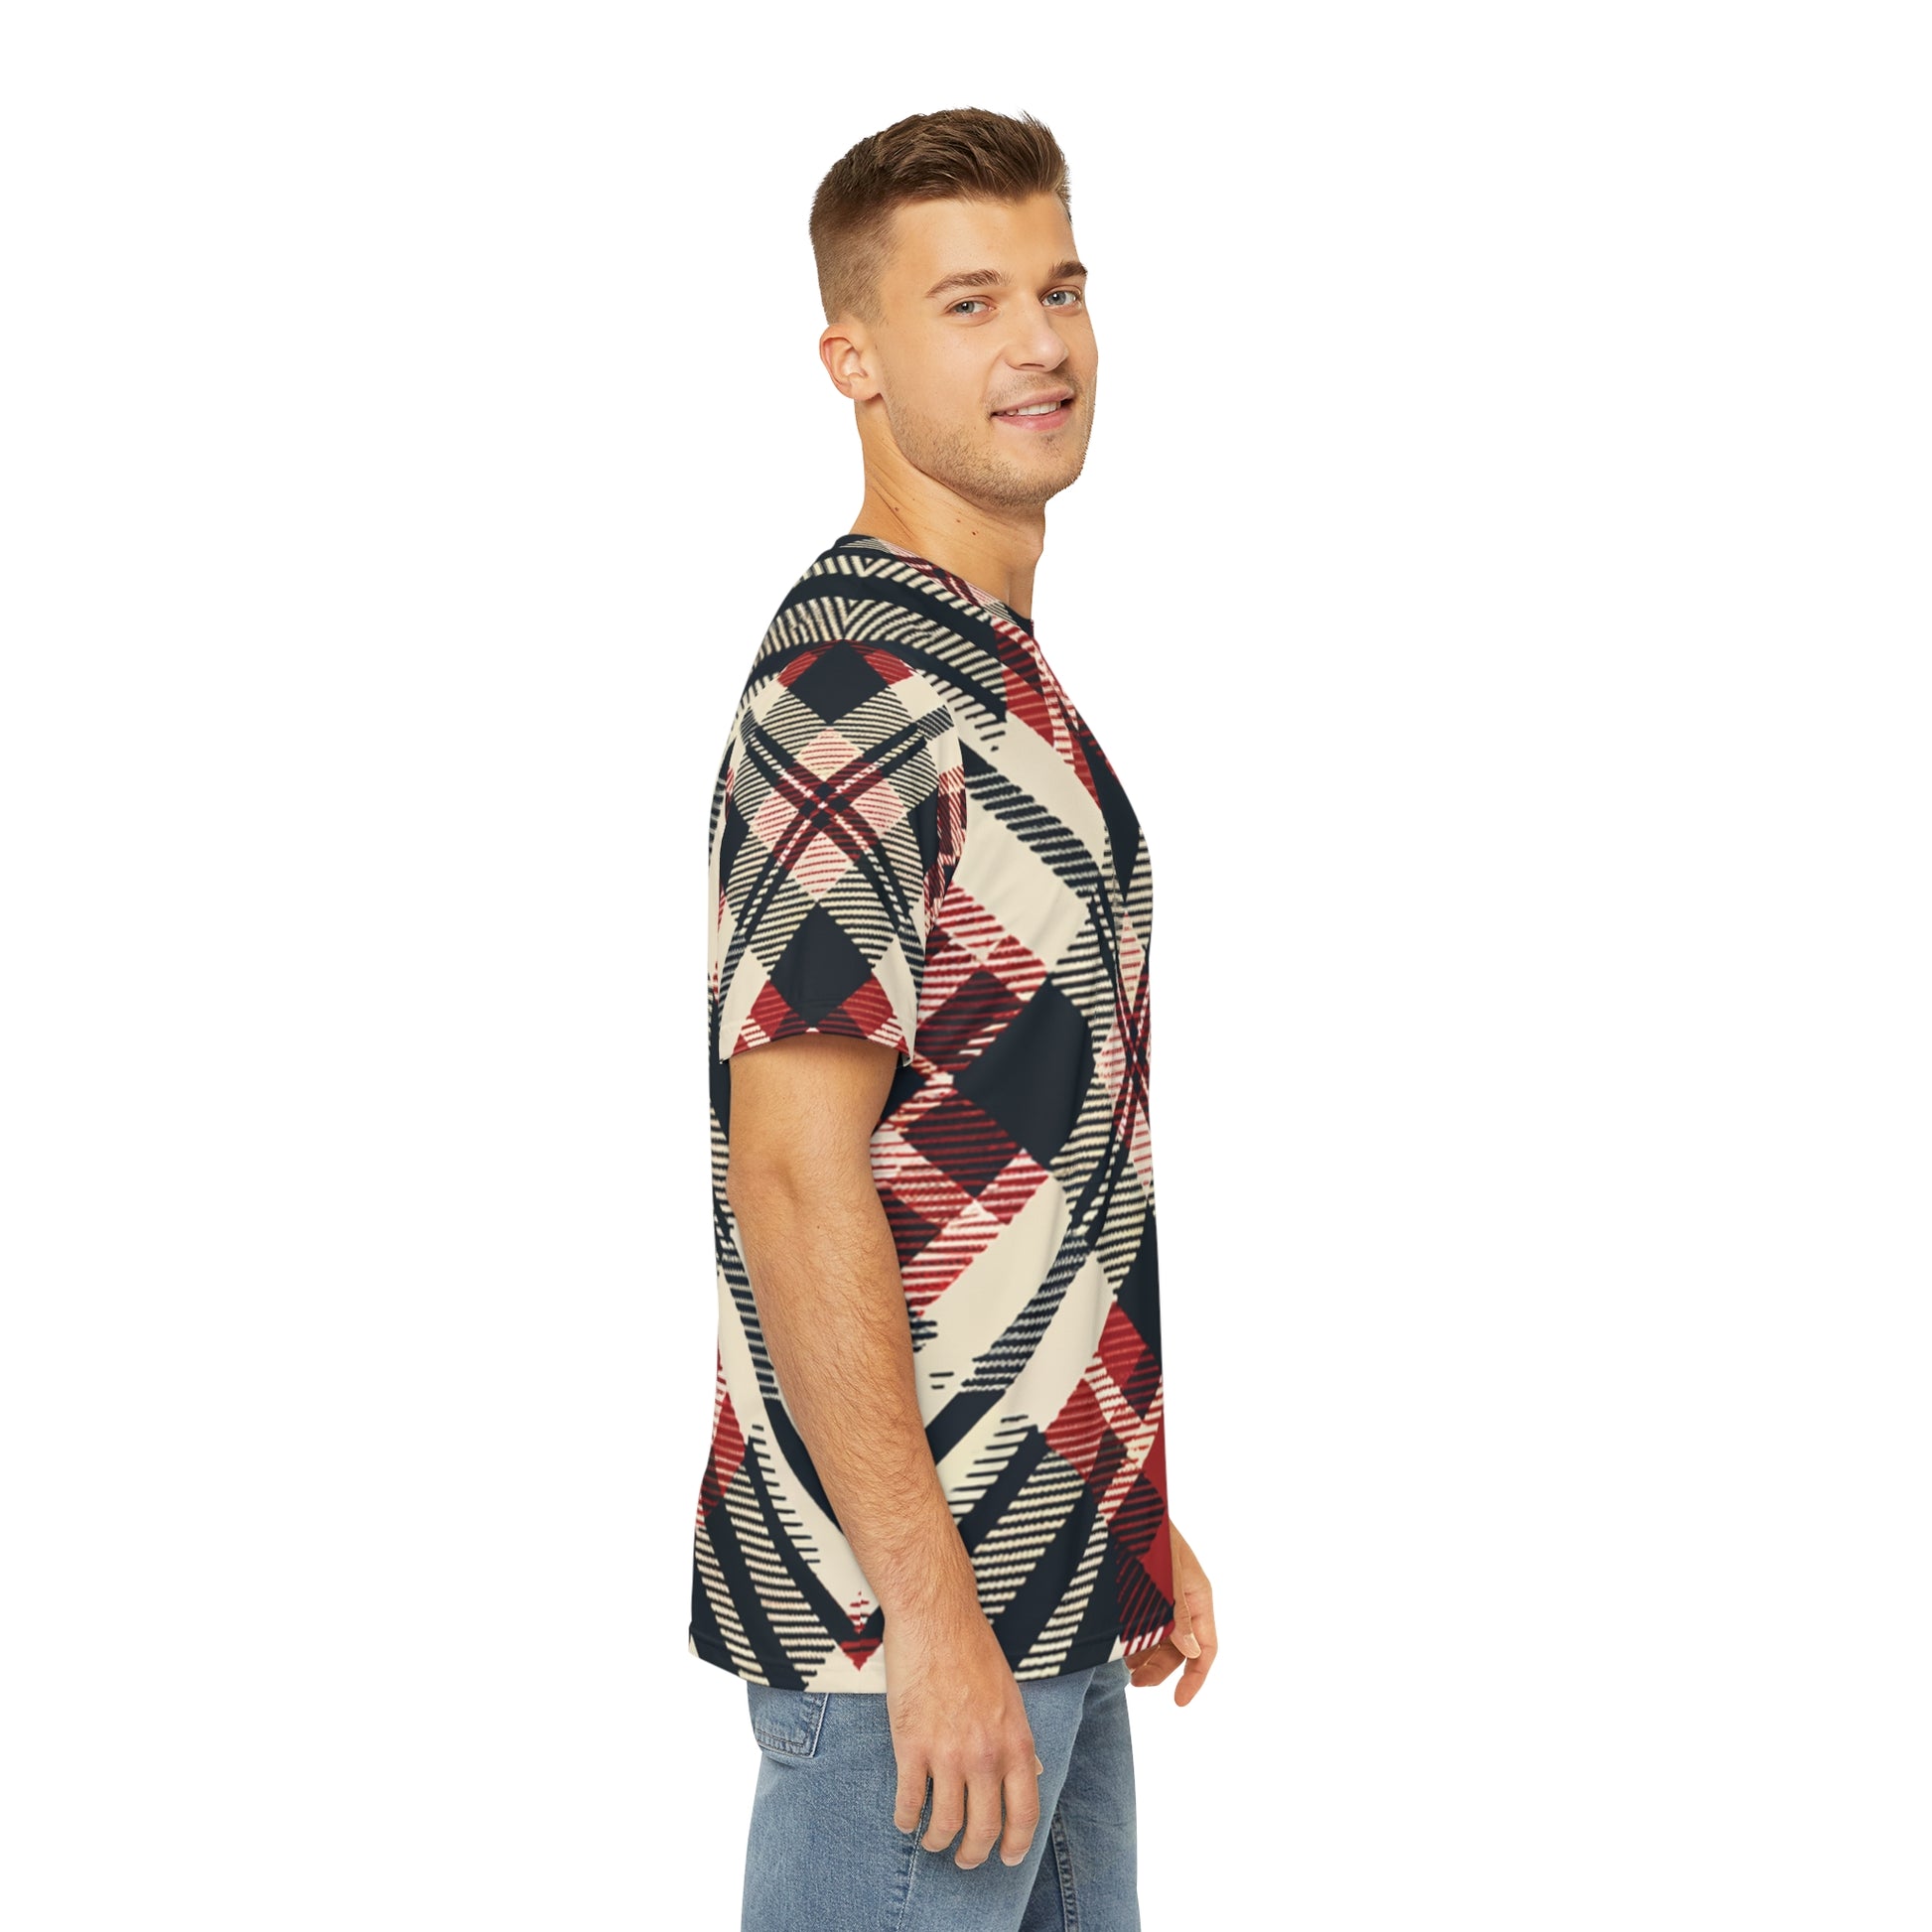 Side view of the Crimson Crosshatch Elegance Crewneck Pullover All-Over Print Short-Sleeved Shirt red black beige plaid print paired with casual denim pants worn by white man